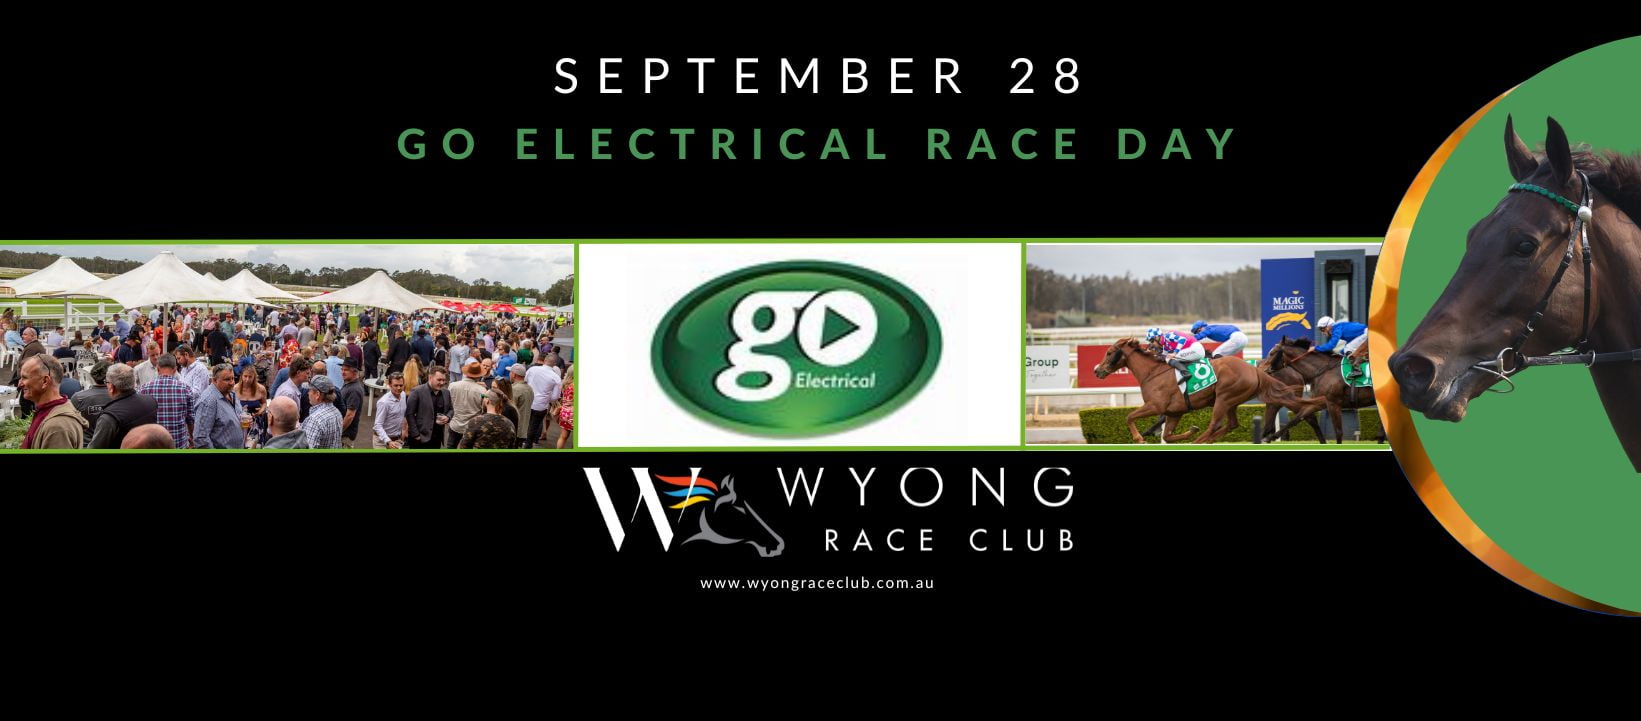 Go Electrical Race Day